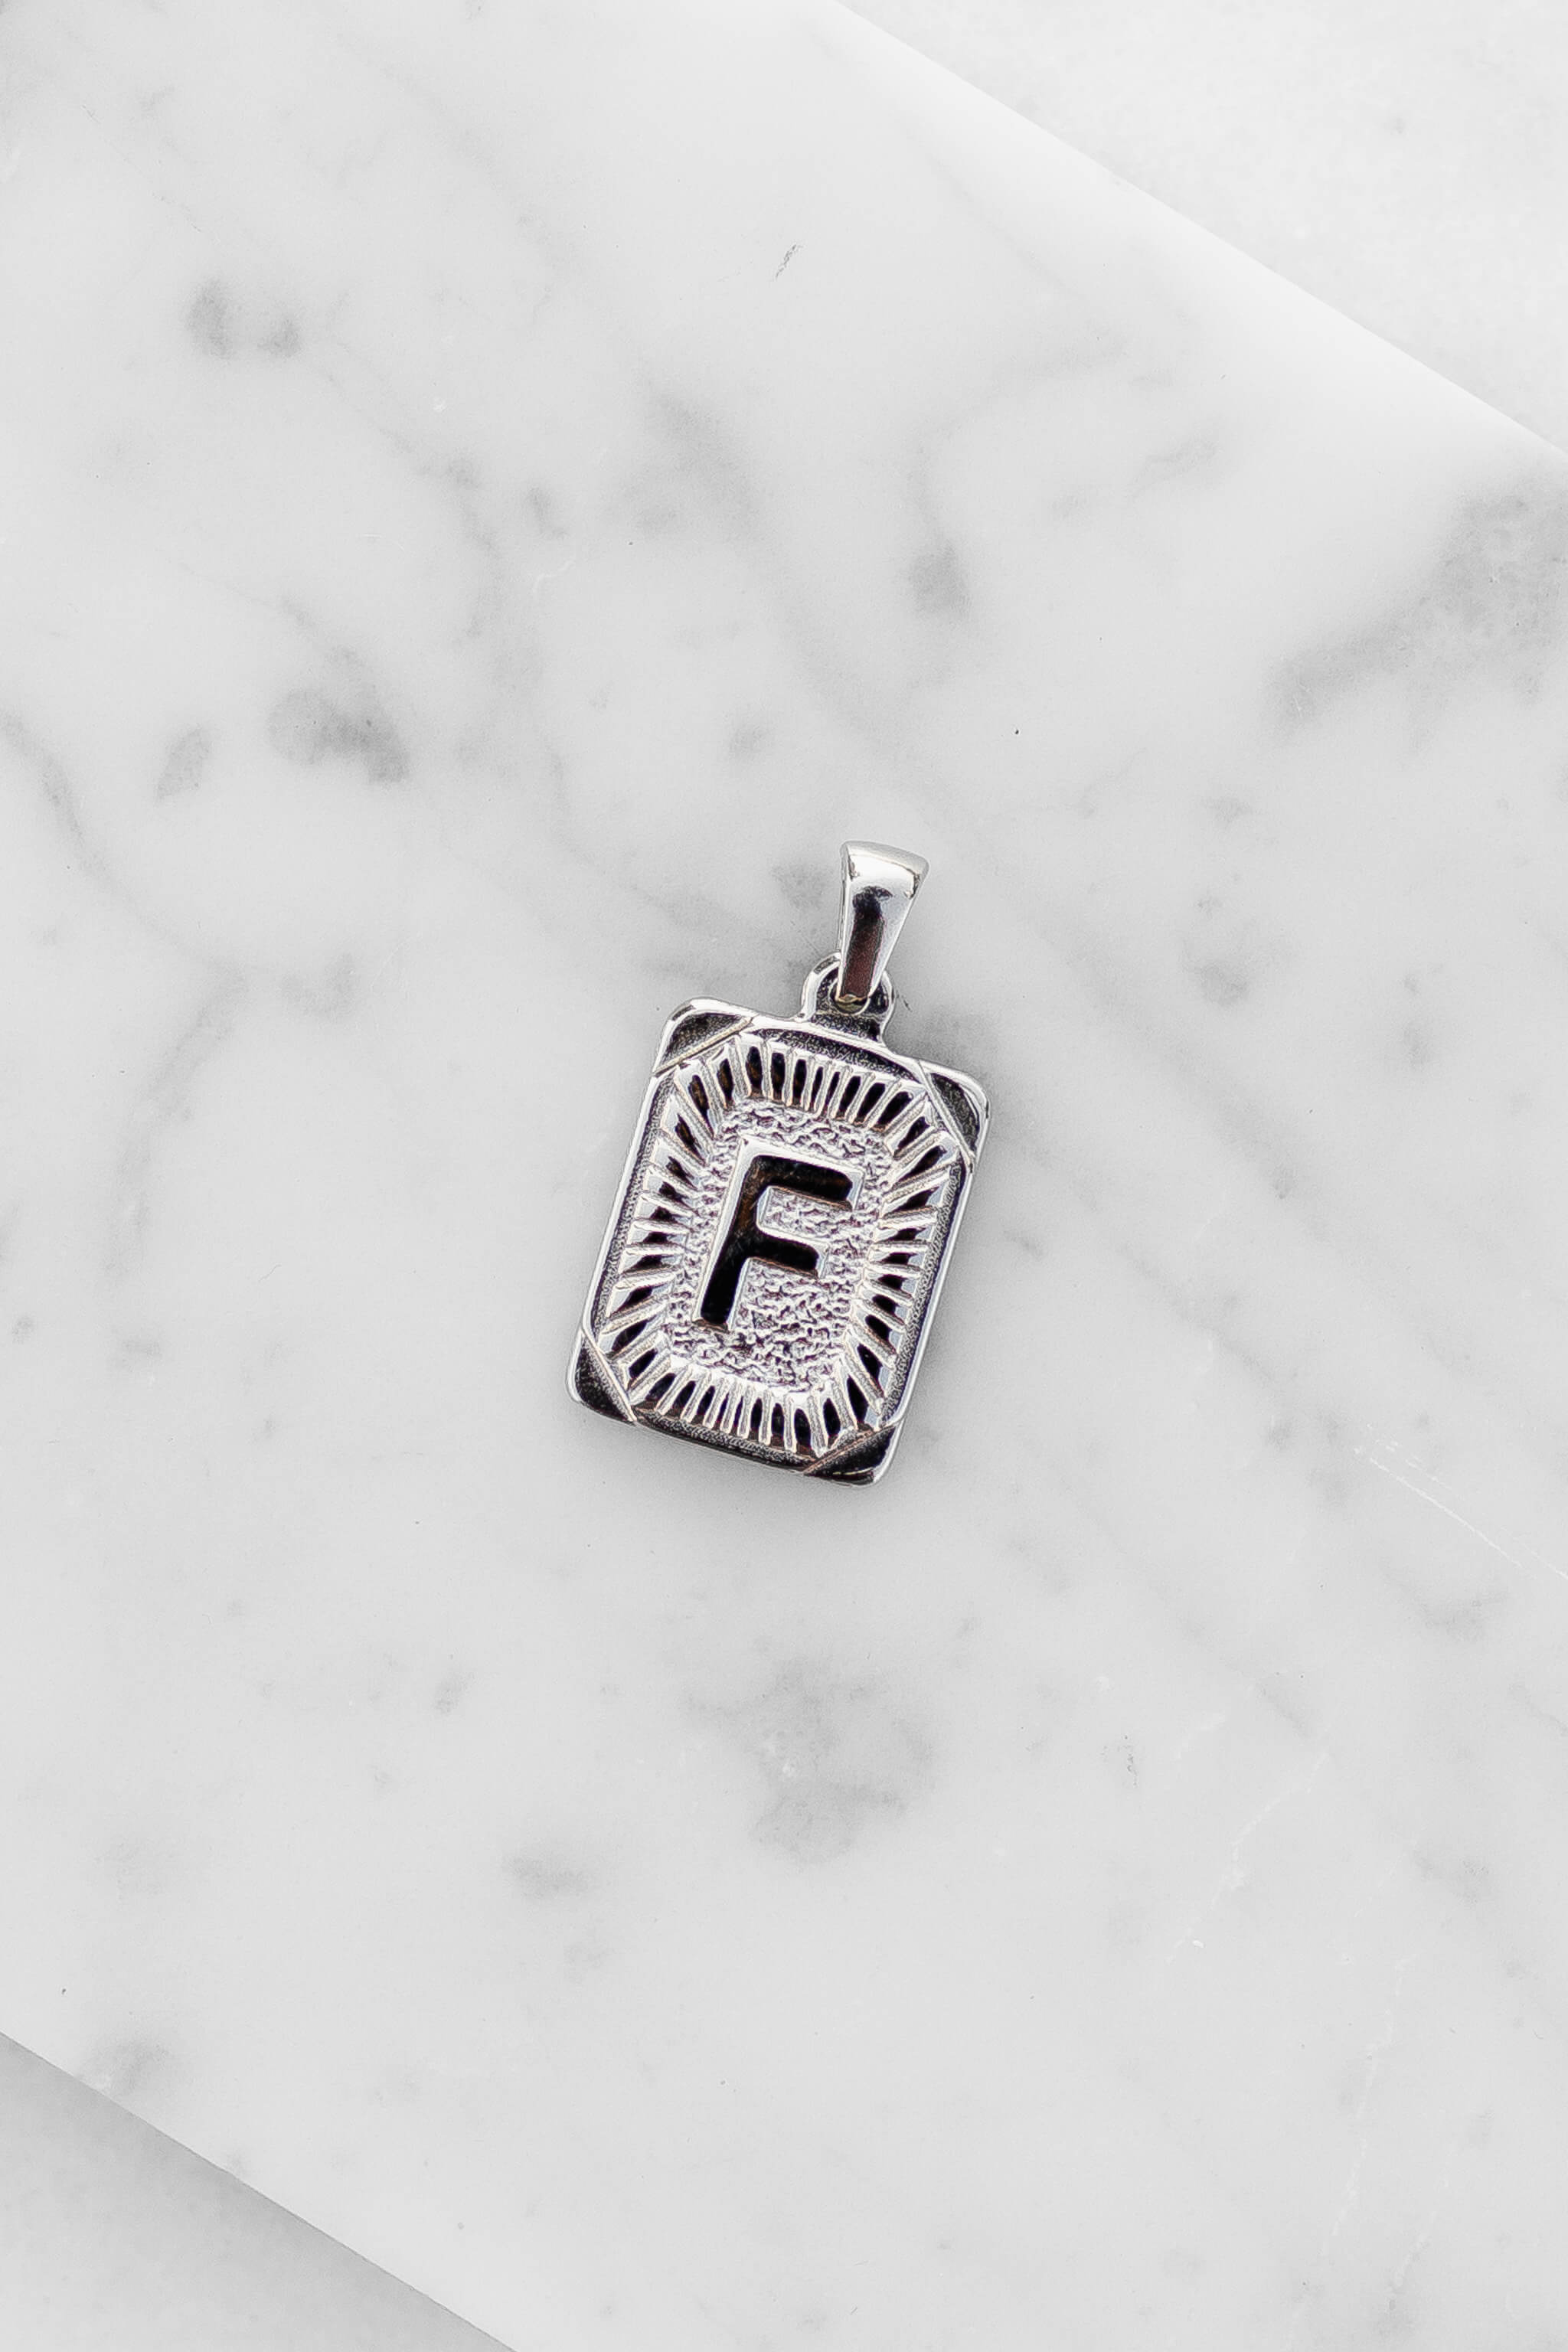 Silver Monogram Letter "F" Charm laying on a marble